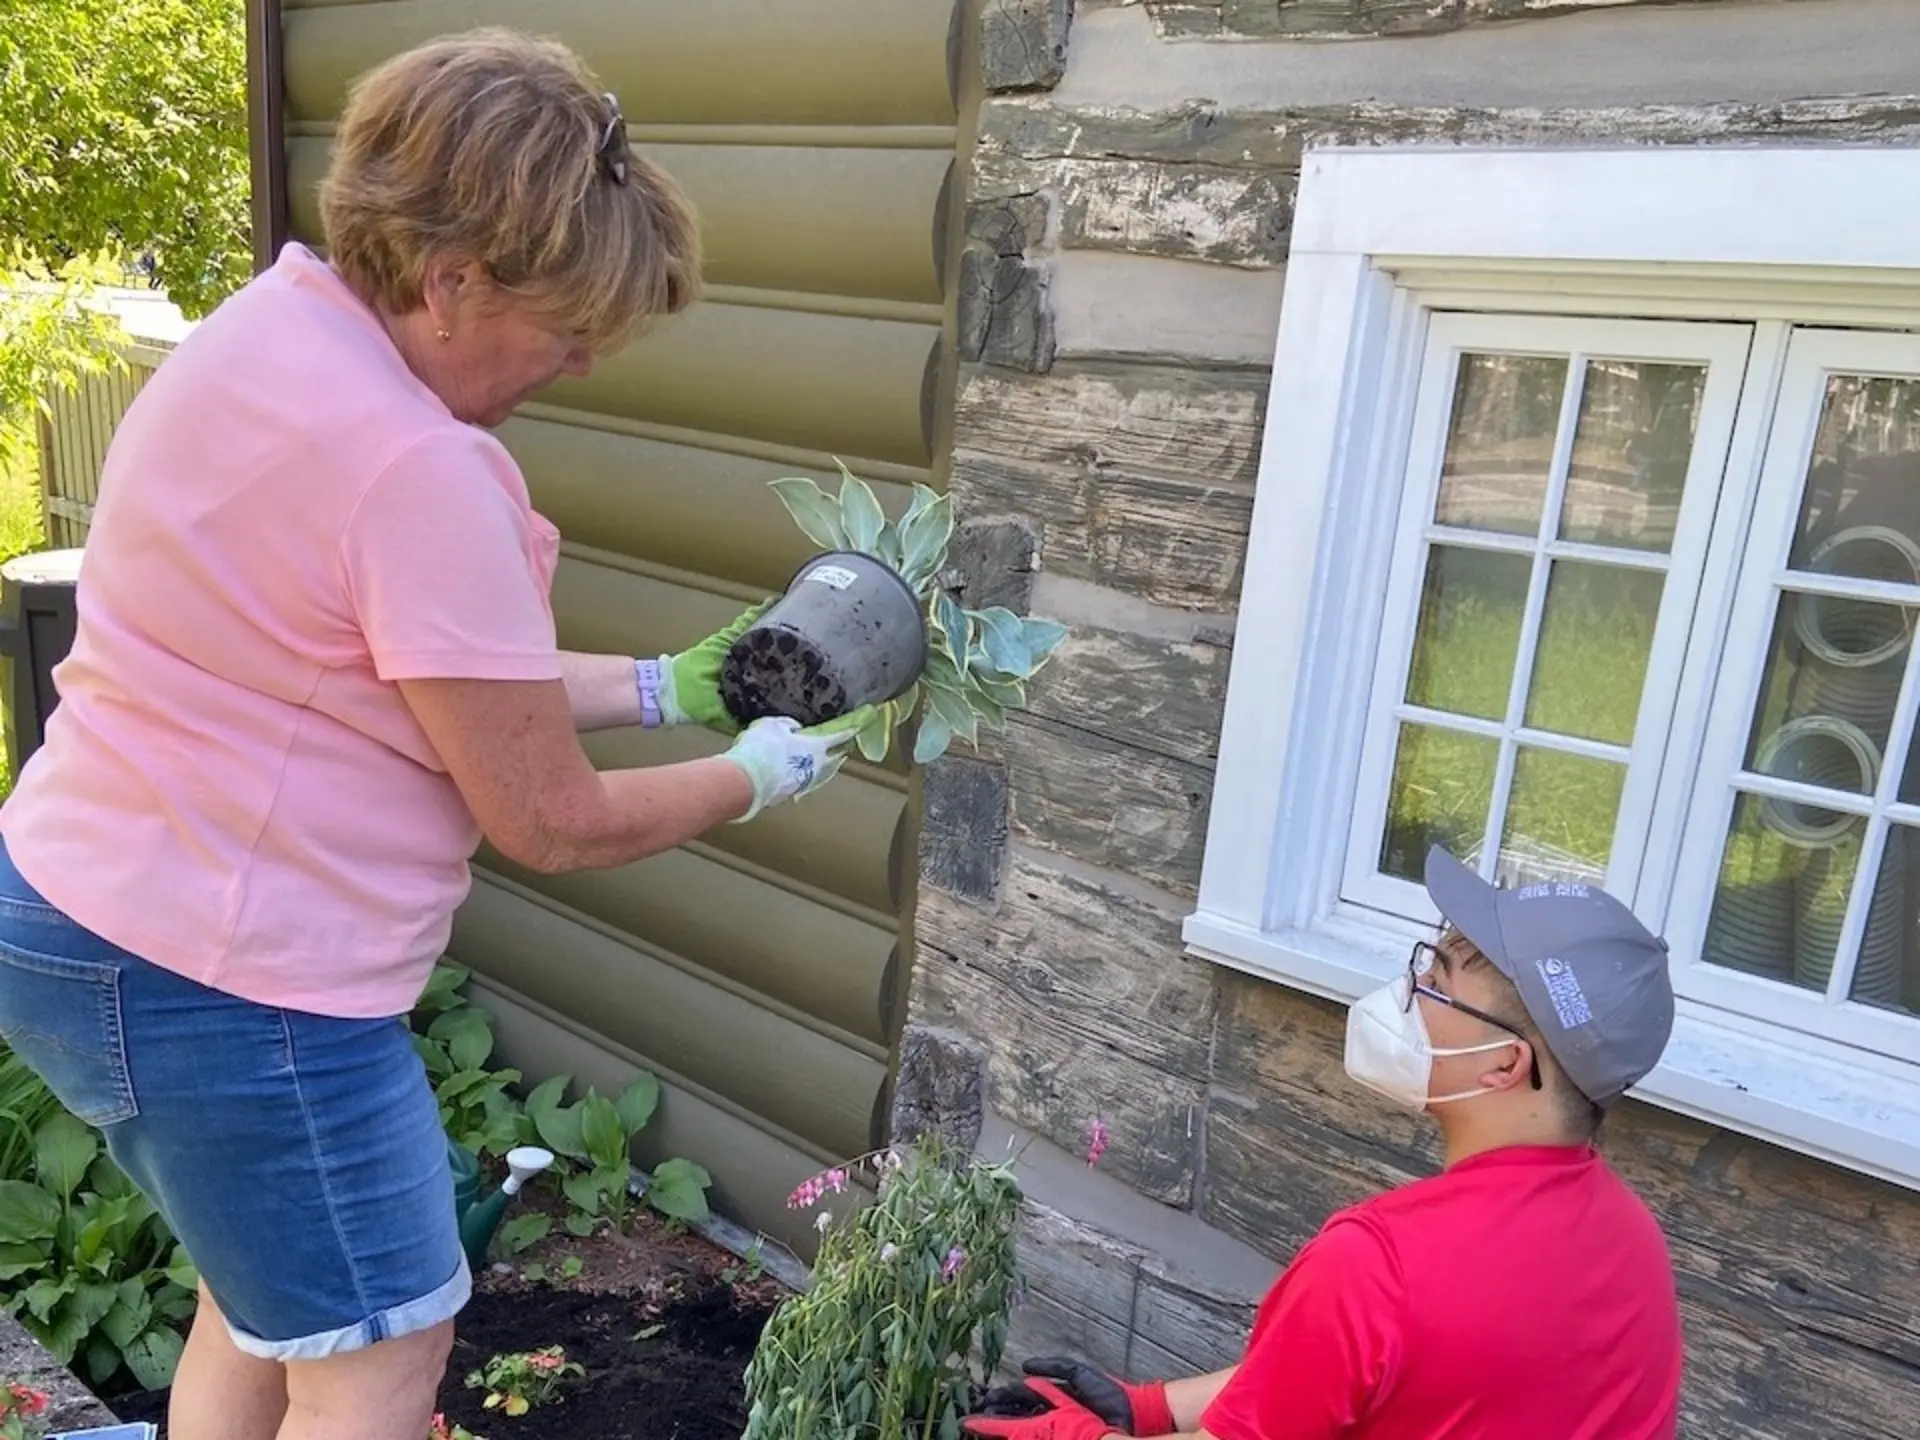 Gardening can be daunting for people with dementia, but also helpful